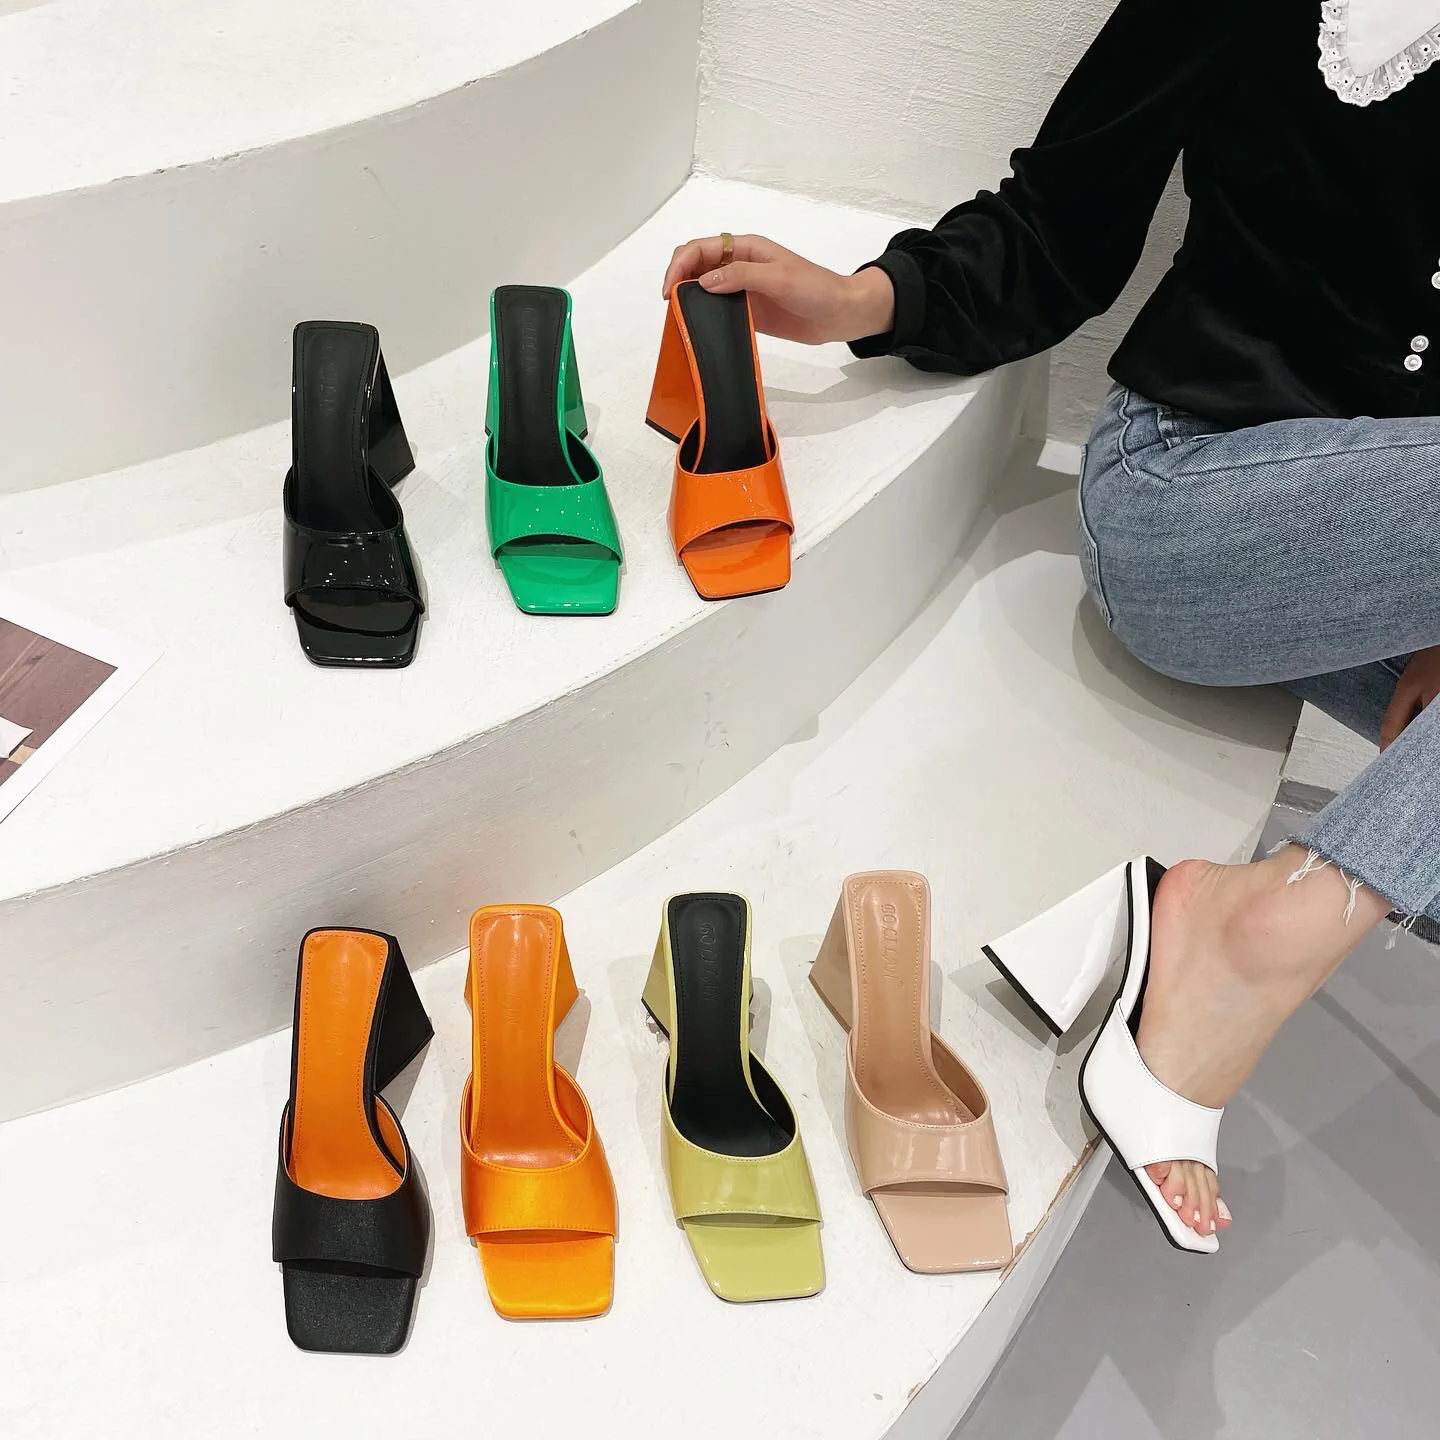 

2022 Europe and the United States women's luxury high heels slippers wholesales ladies outdoor sandals beautiful high heel shoes, White,black,apricot,pink,green